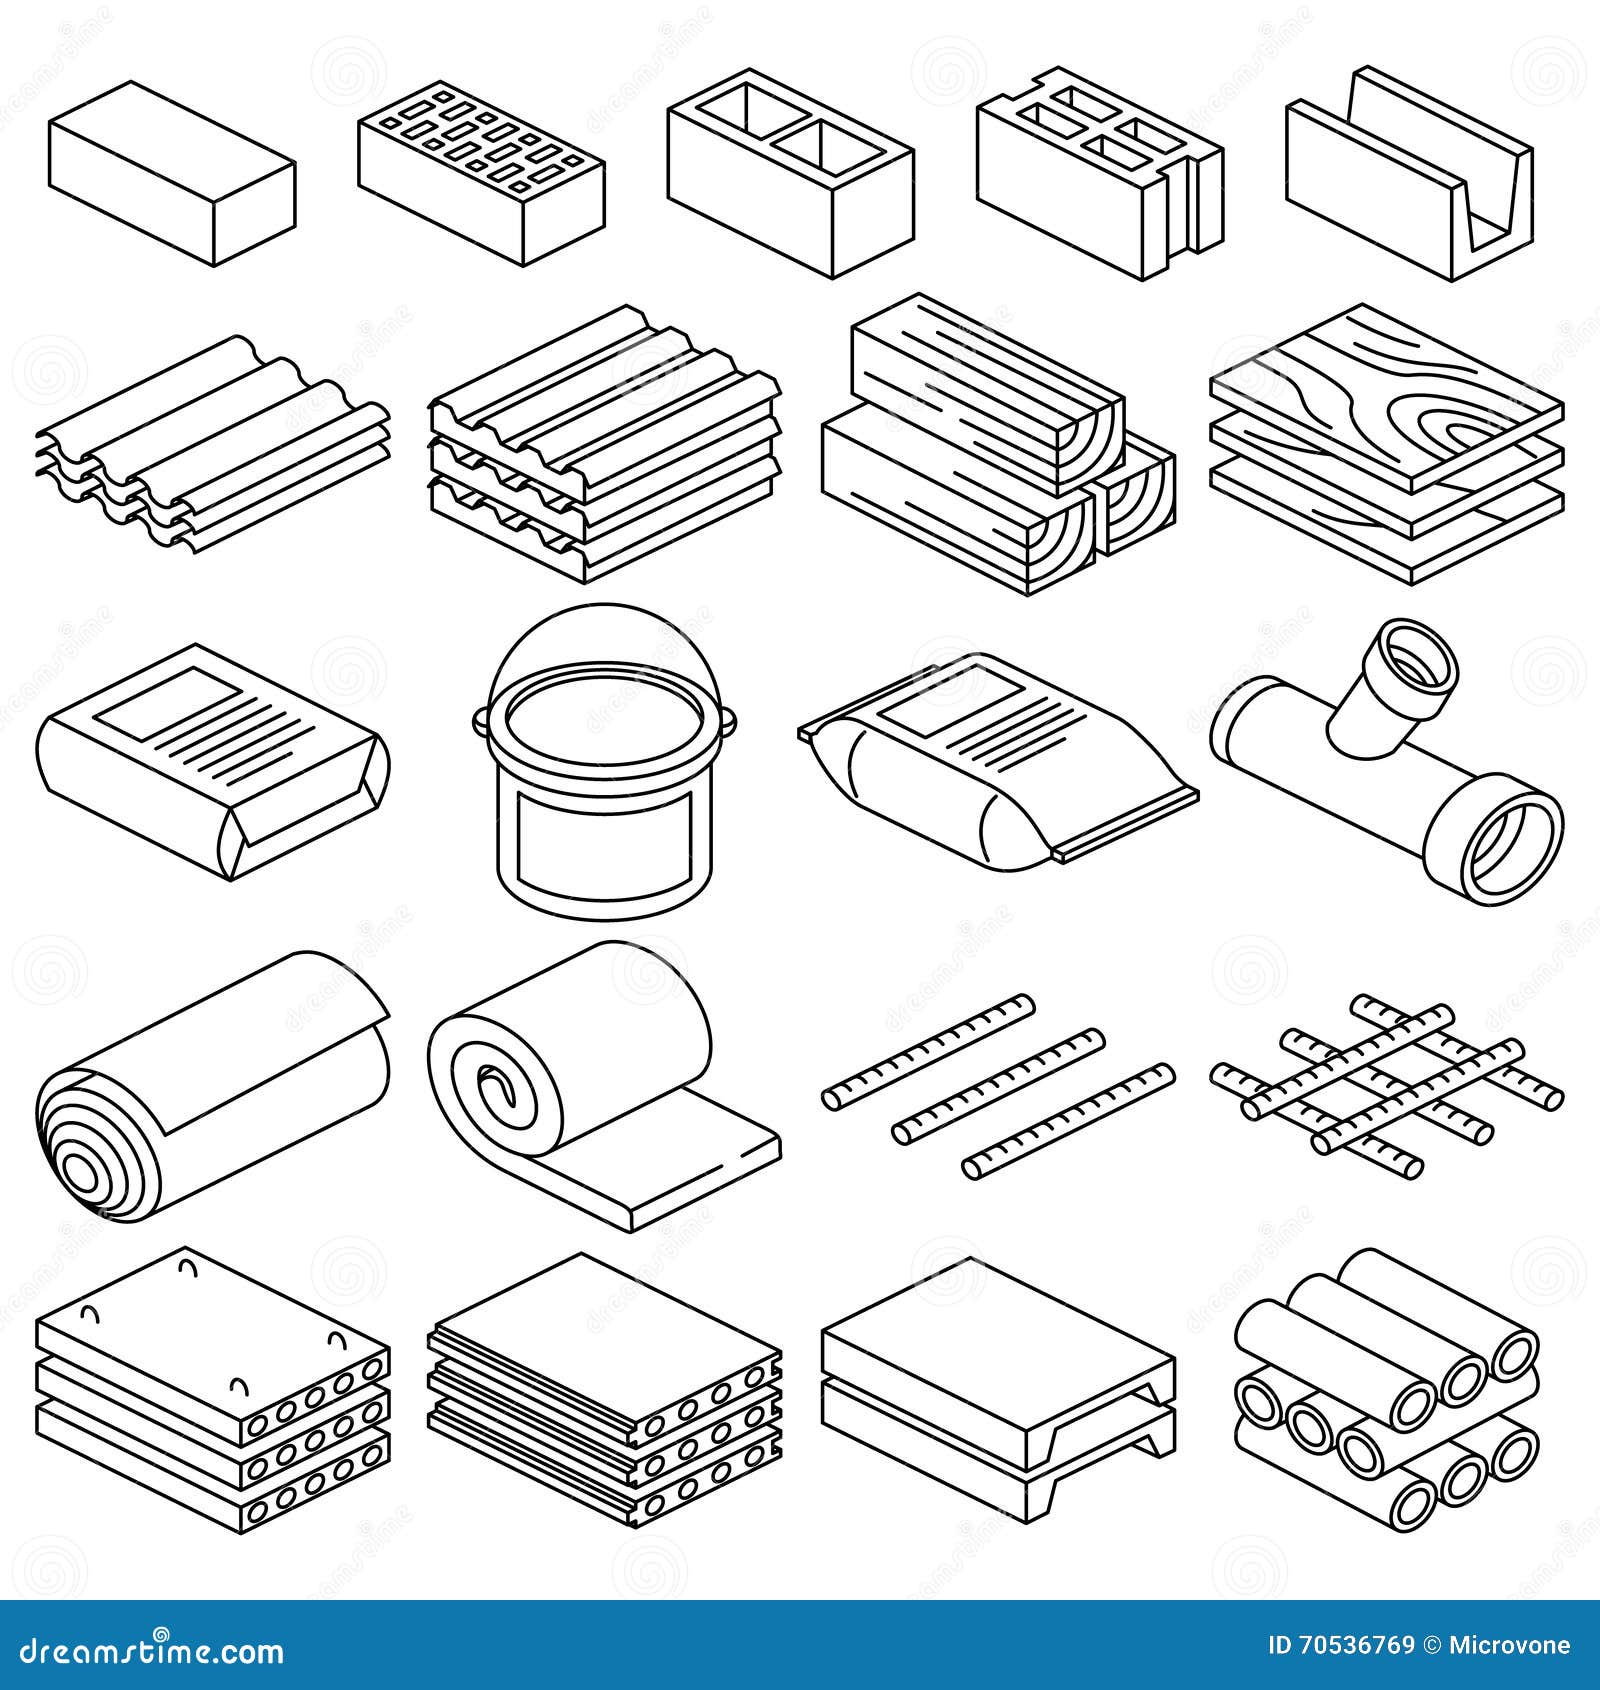 building and construction materials  linear icons